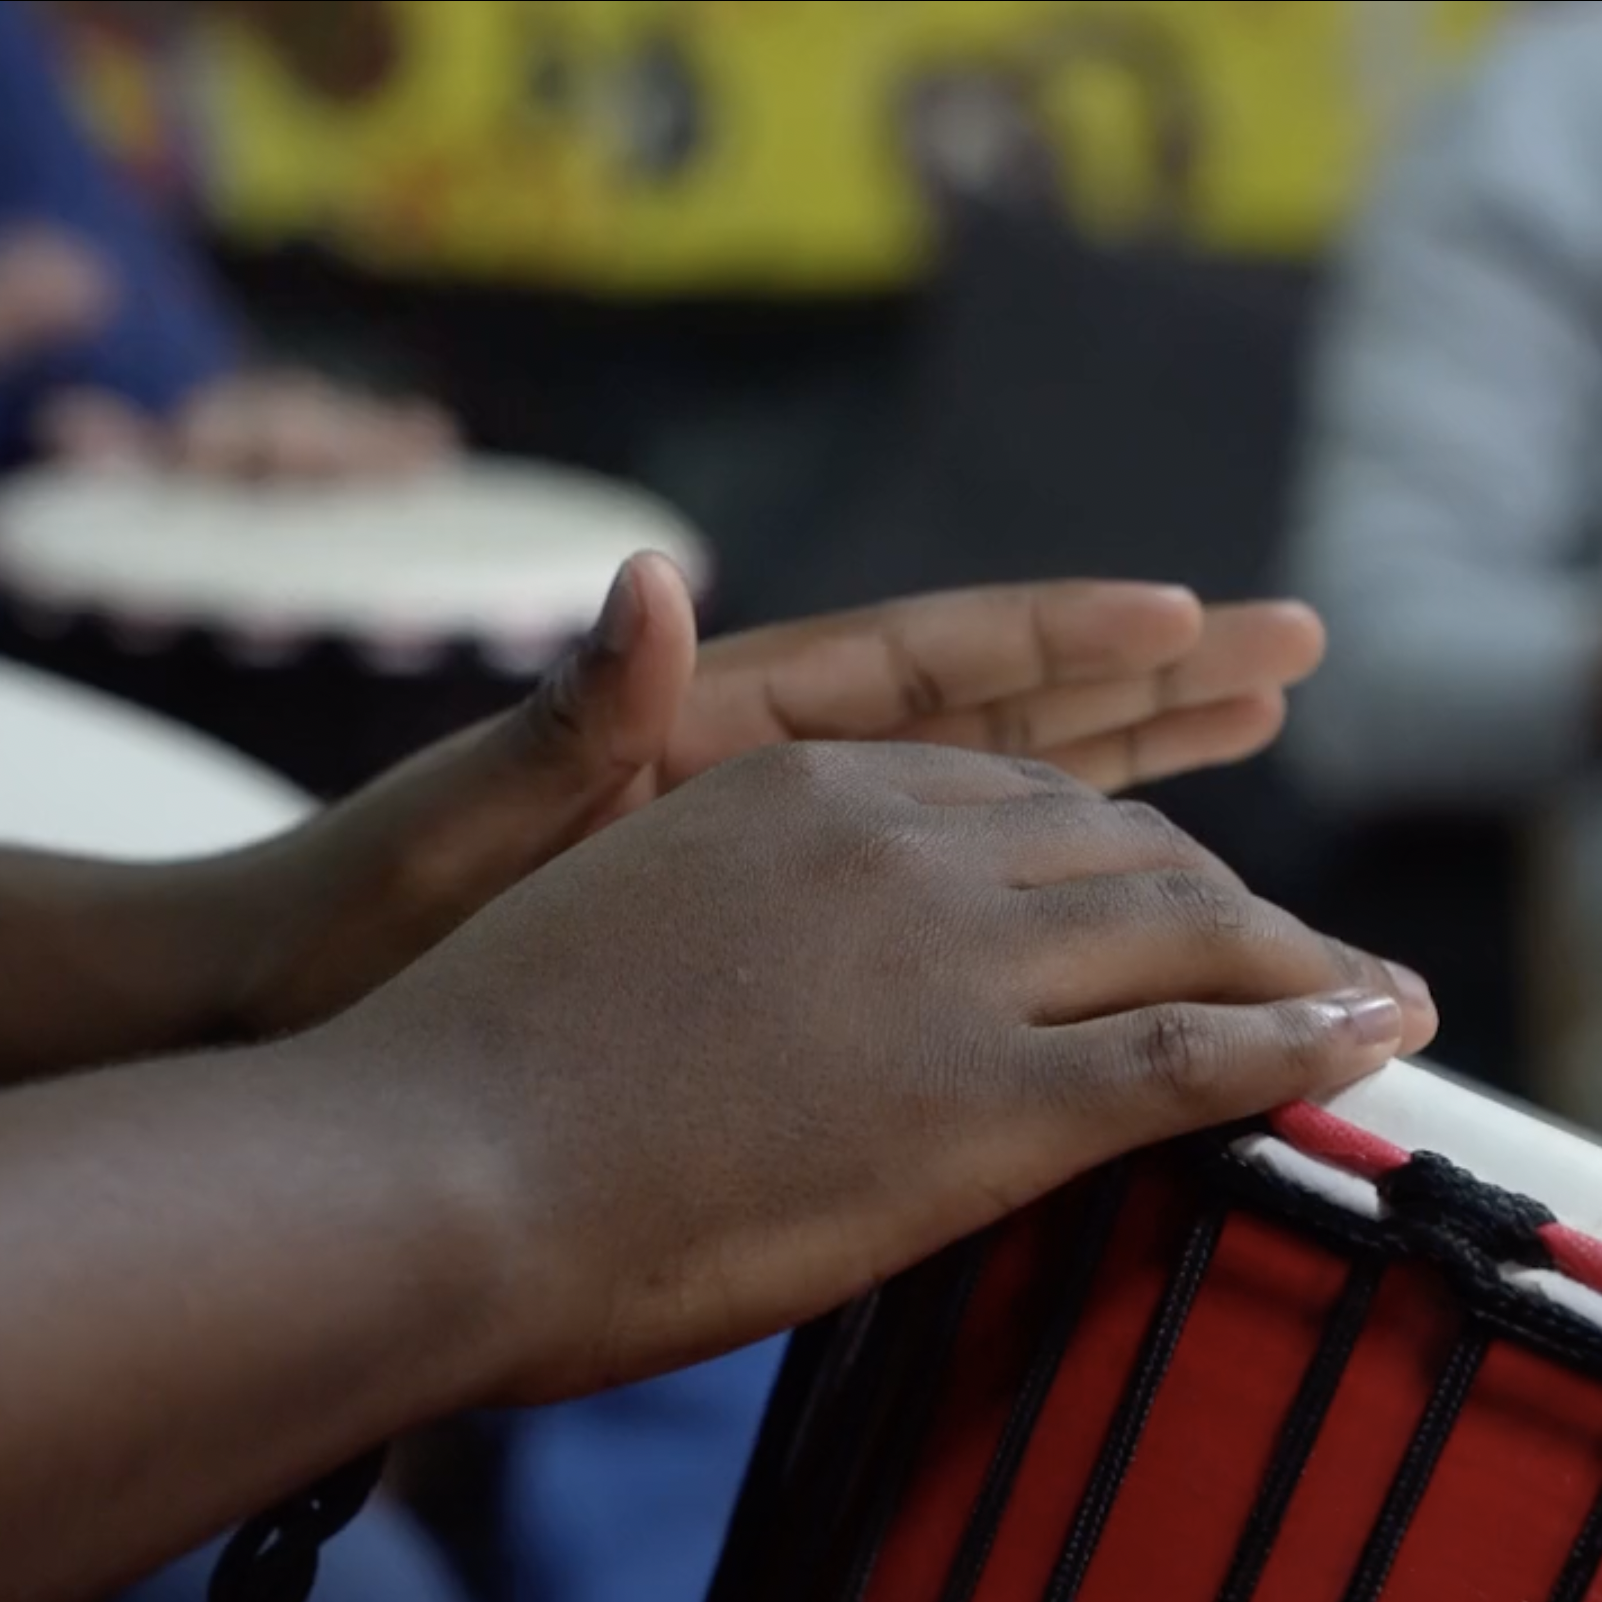 Home - Drumming as a Way to Communicate